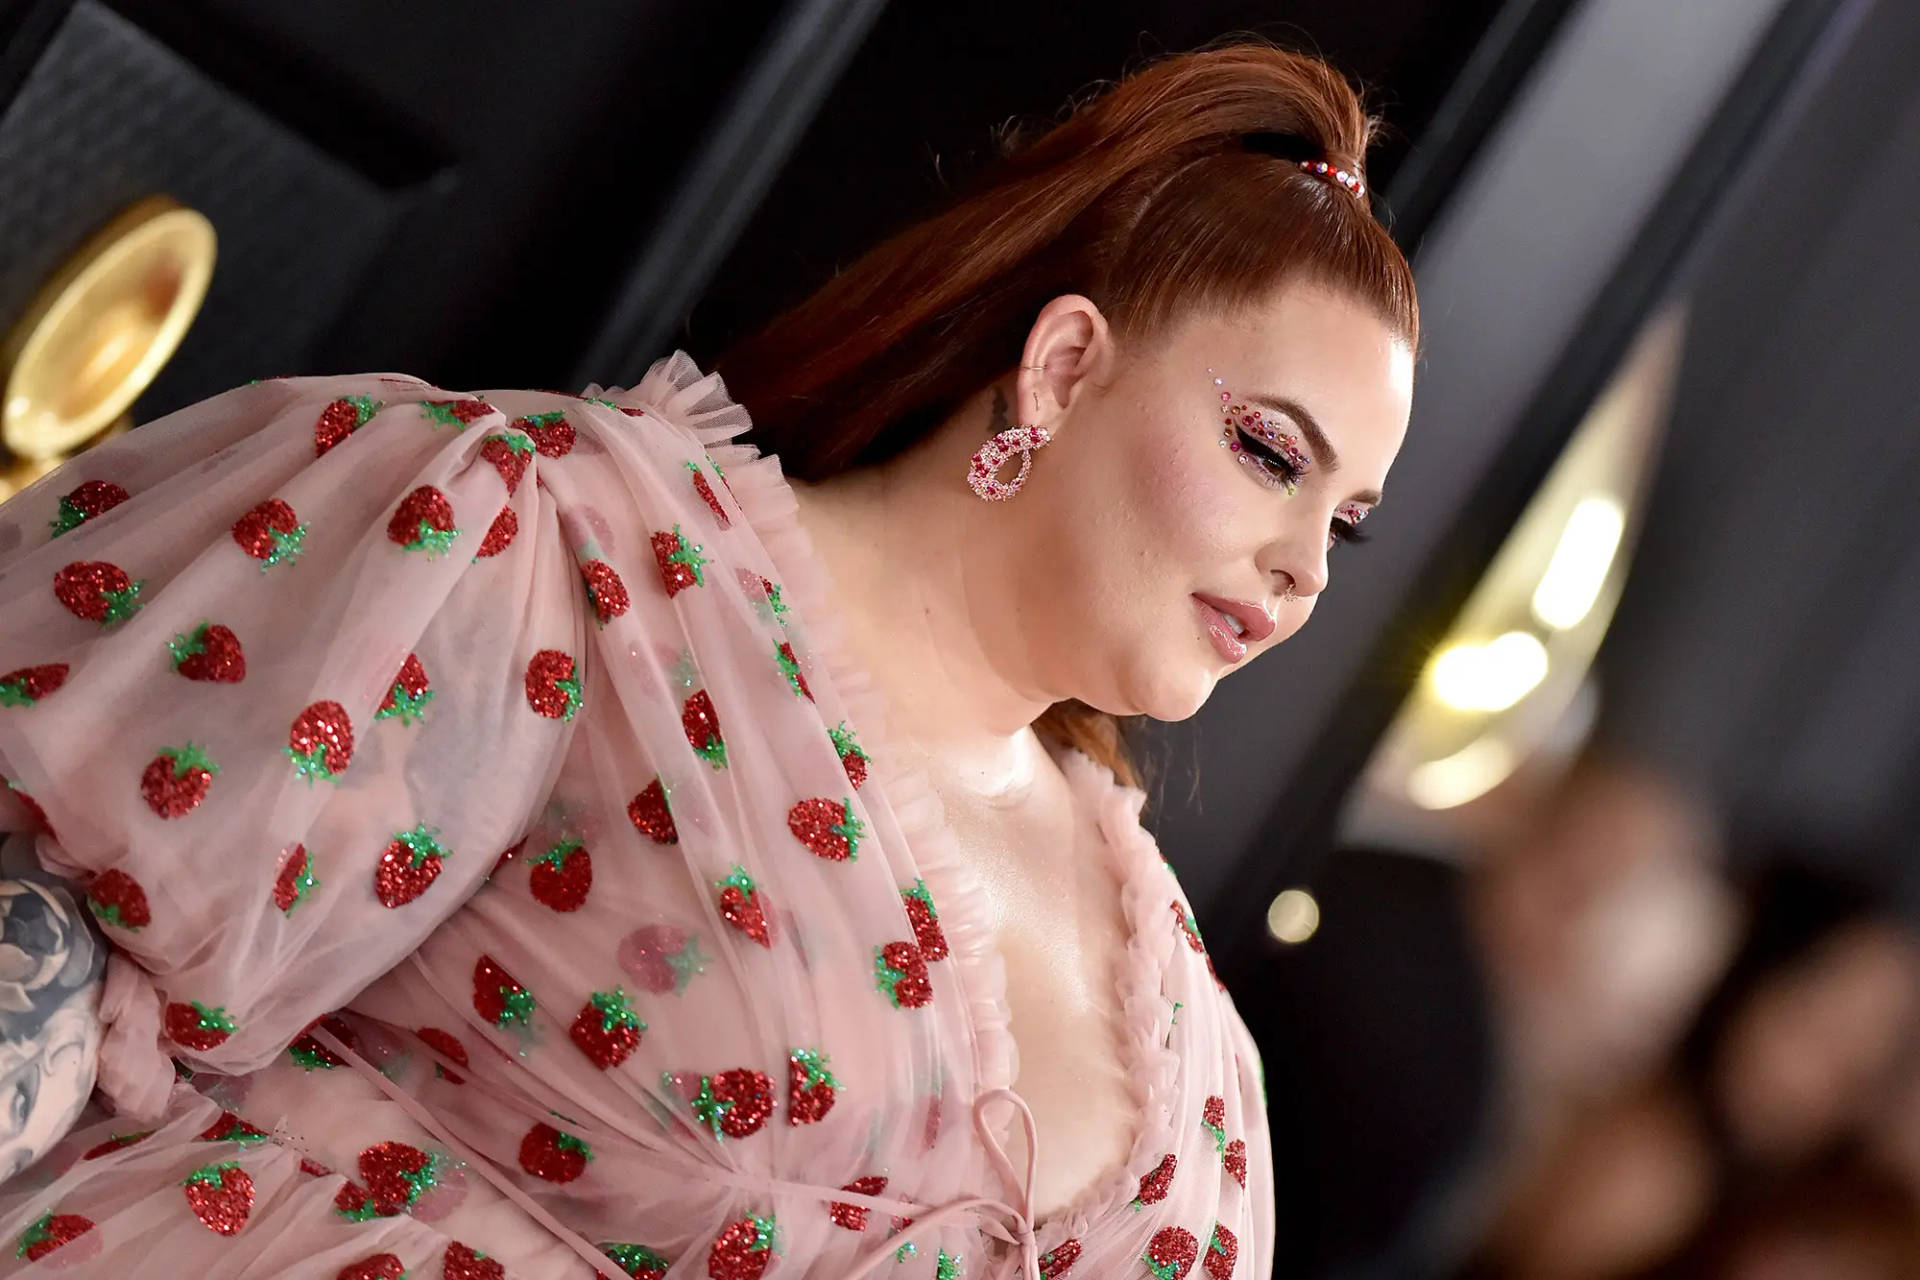 Tess Holliday 'cries for 2 hours' over teething struggle with son